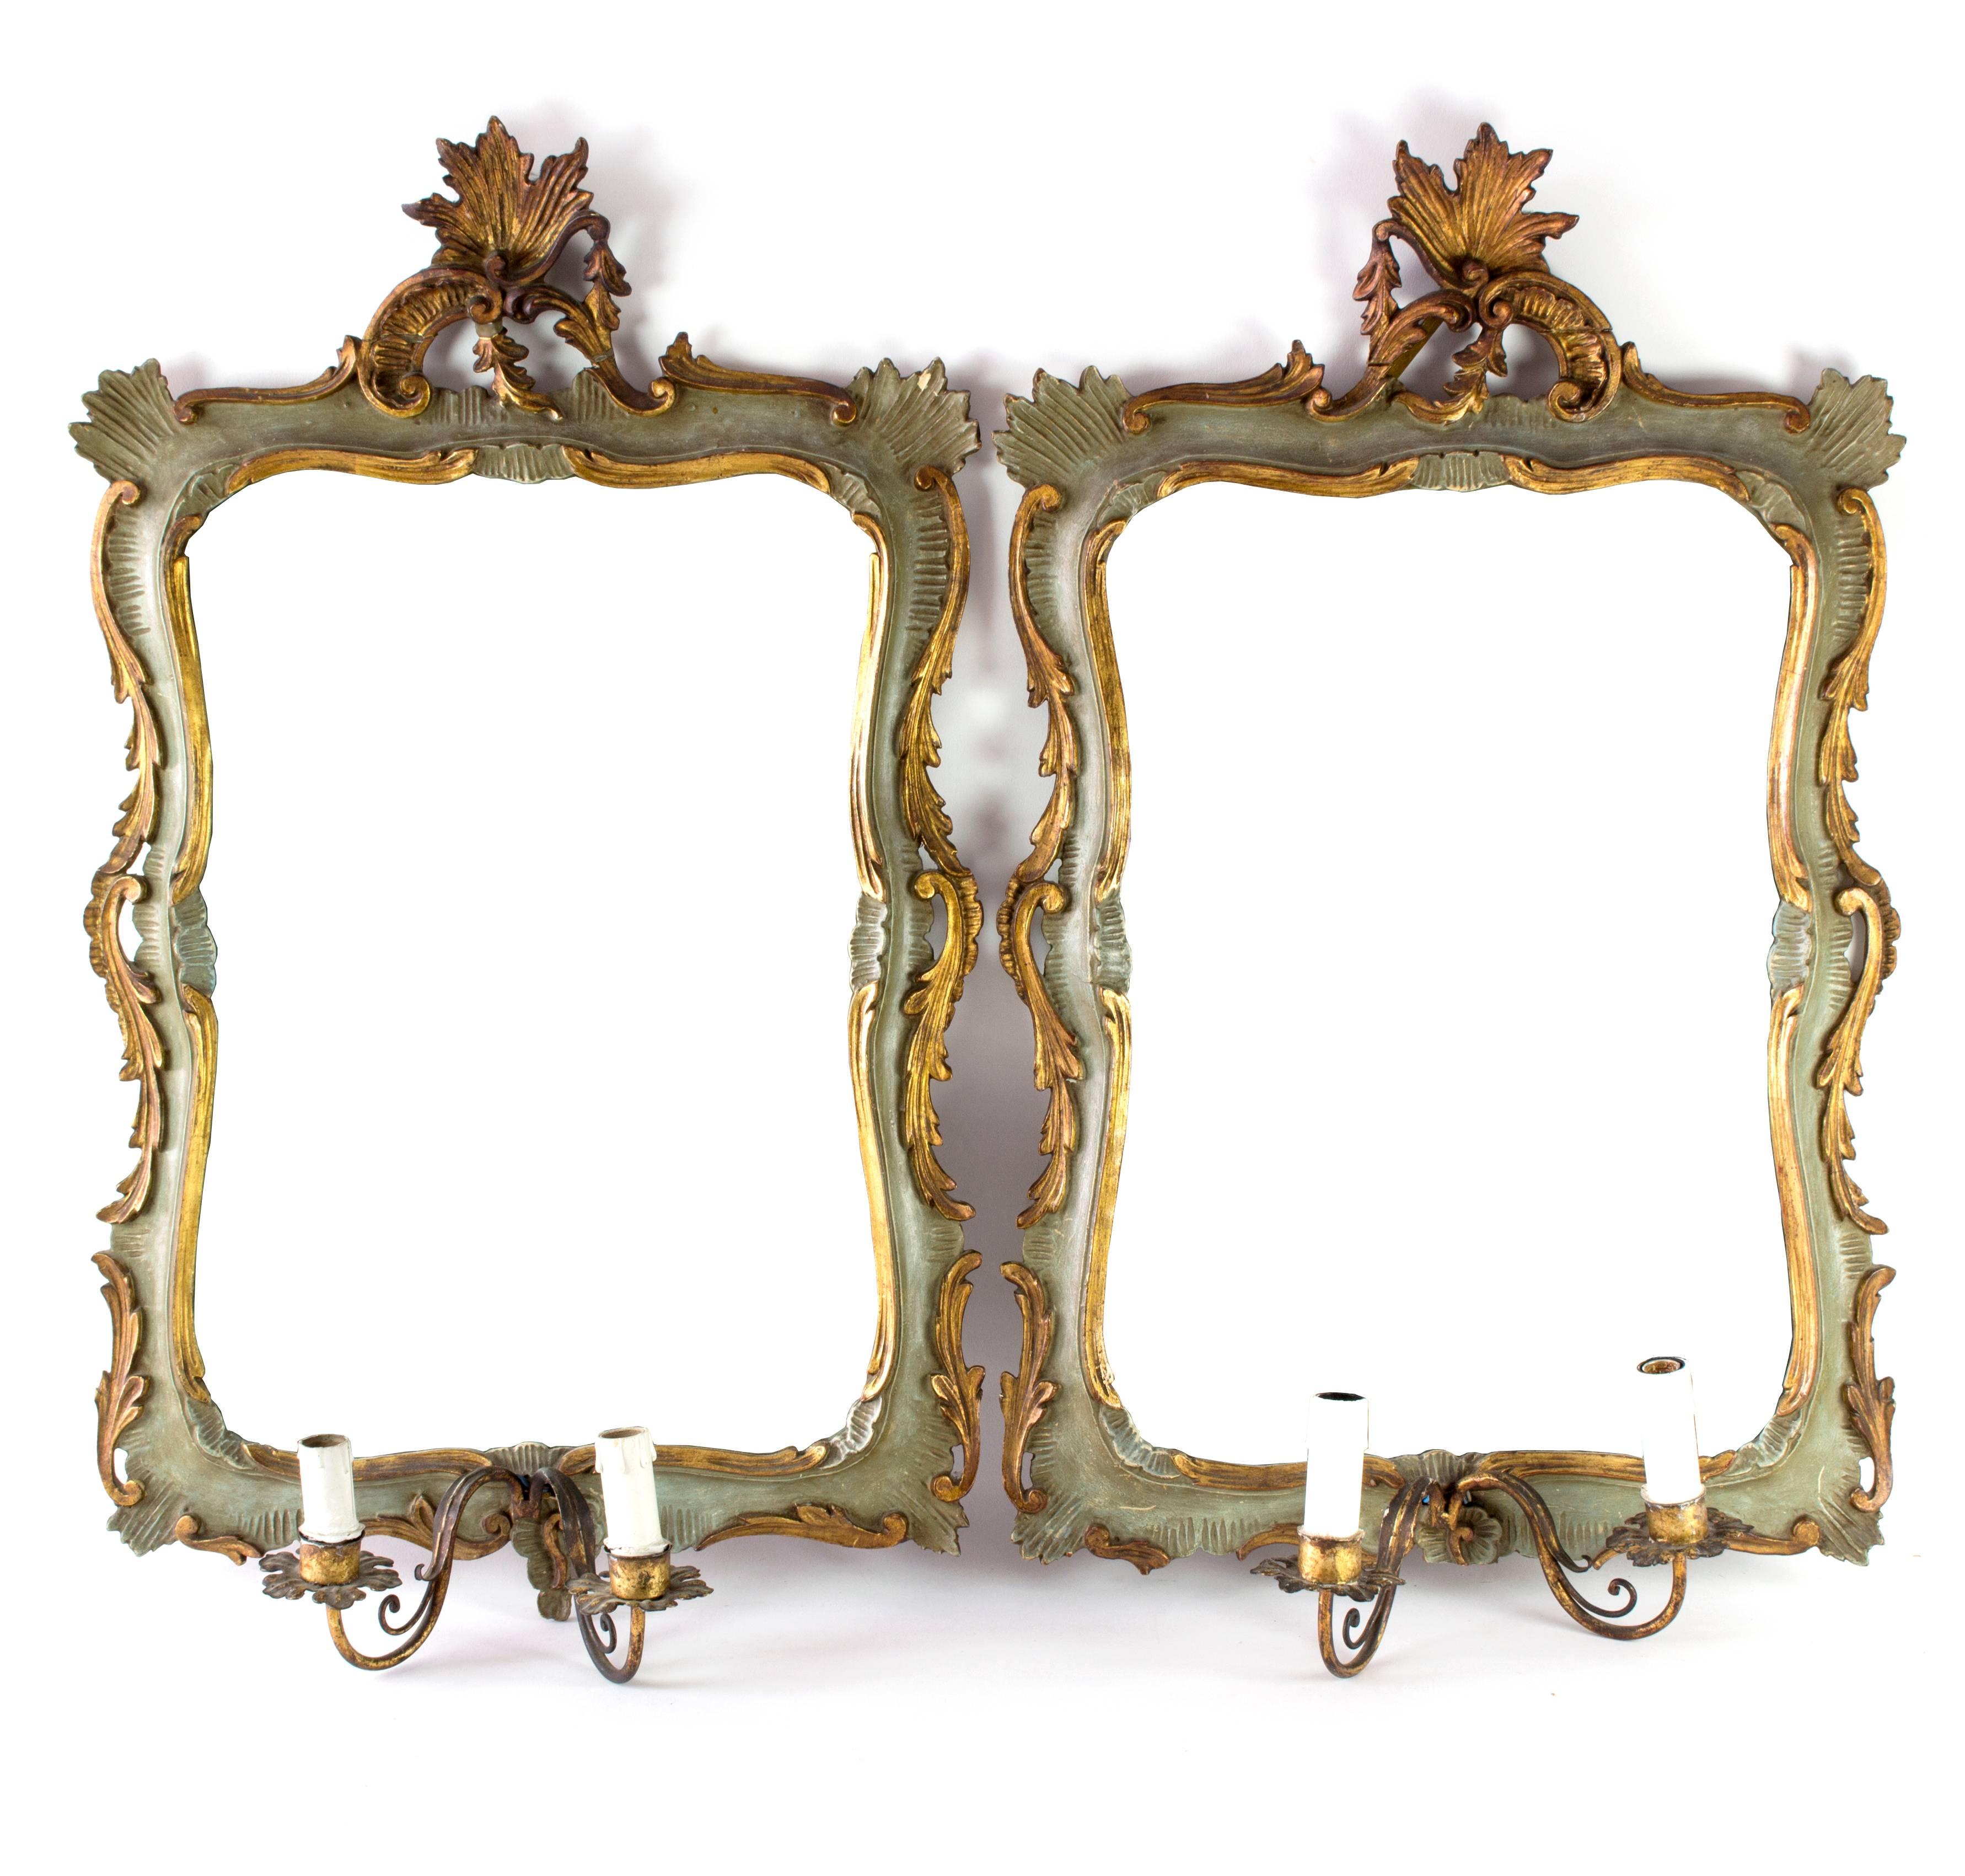 The shaped rectangular plates contained within frames of carved, painted and parcel-gilt Rococo scrollwork, with pierced crestings and each with two gilt toleware candle-branches, hollow to allow for wiring.